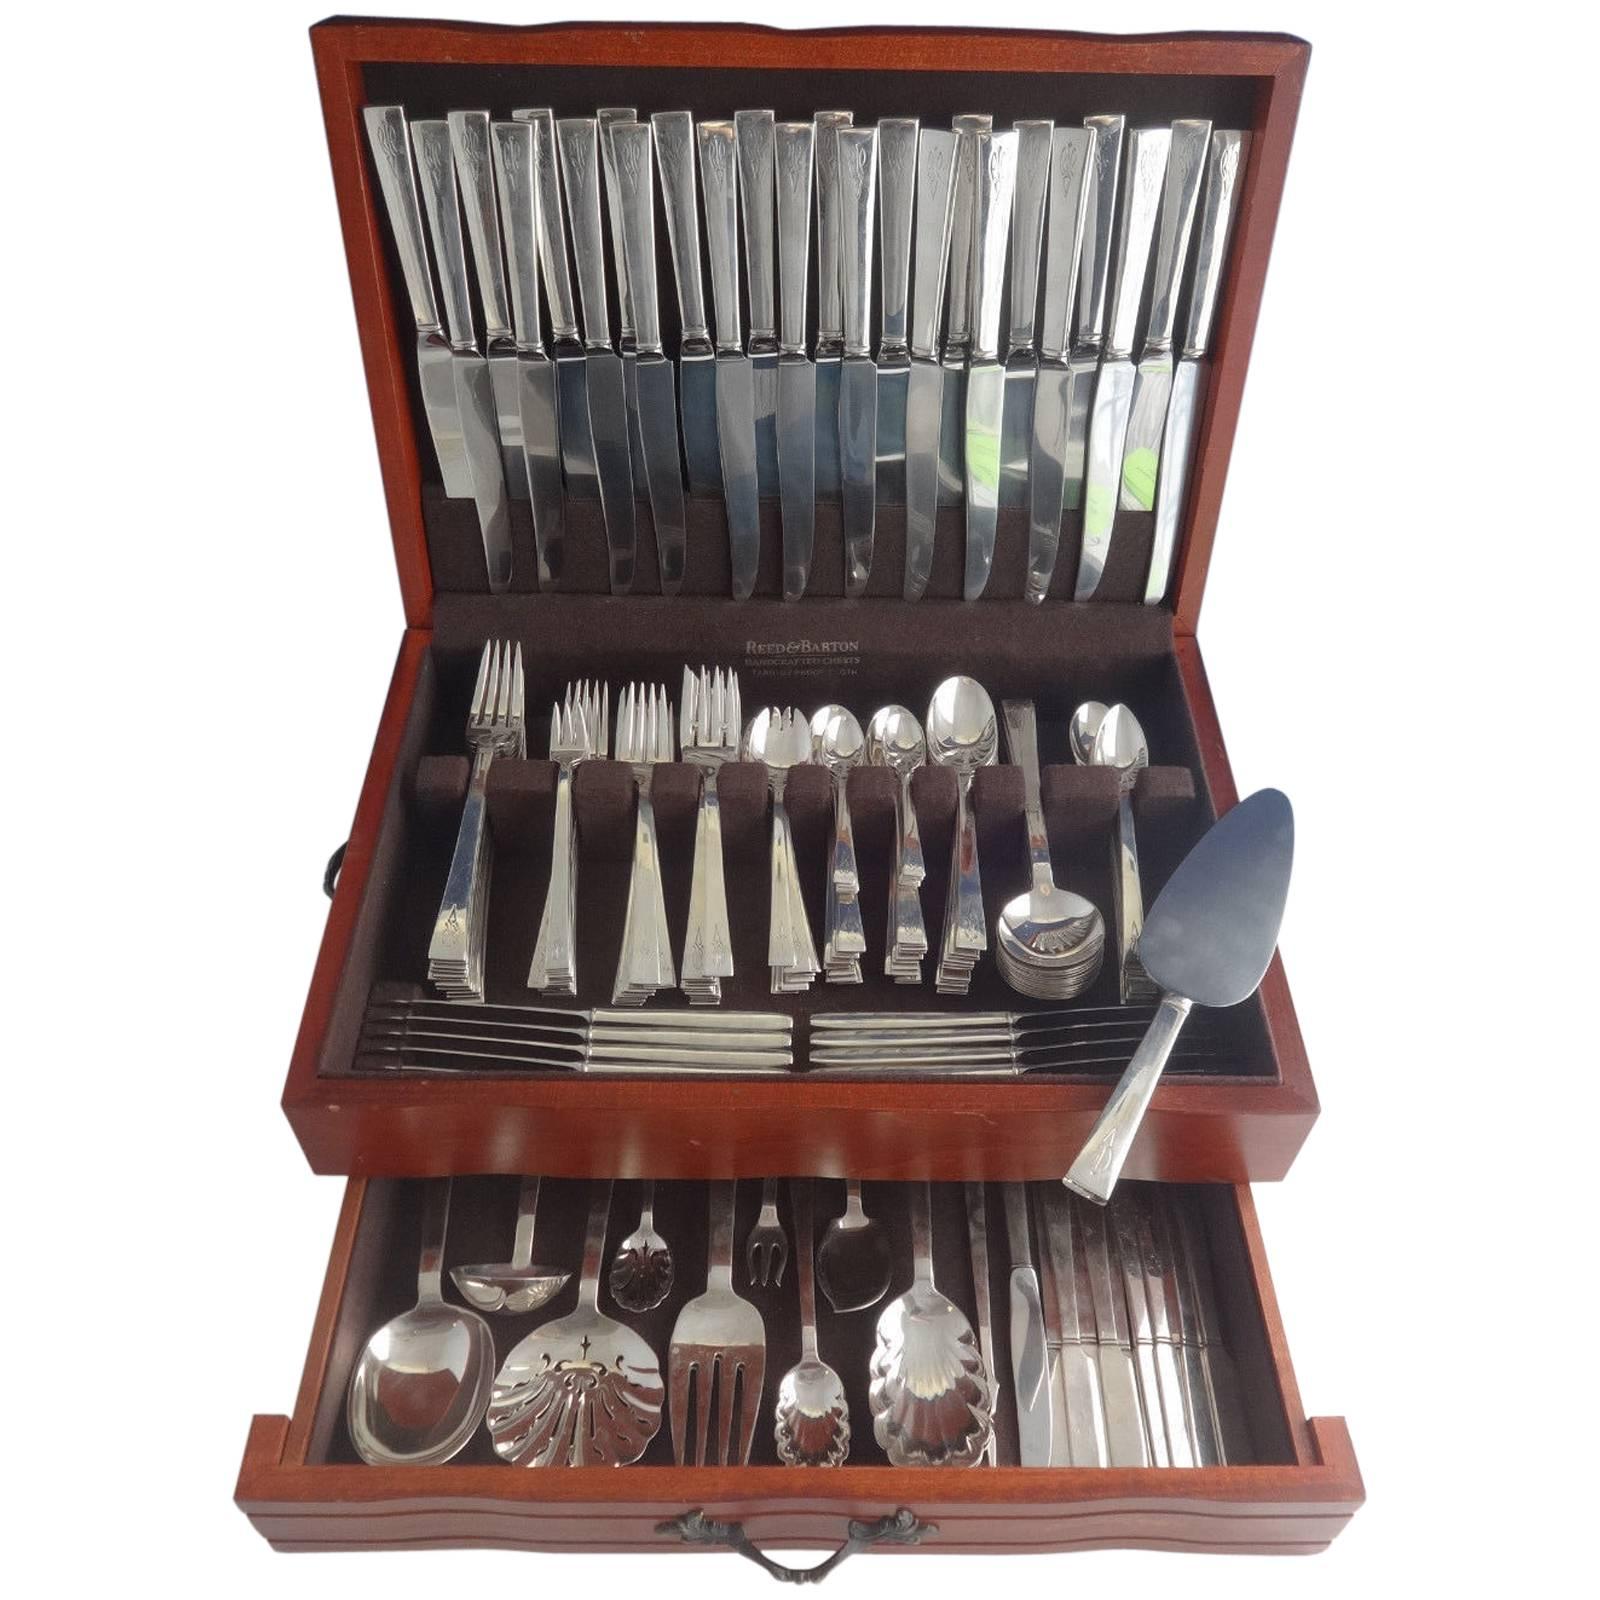 Continental by International Sterling Silver Flatware Set Owned By Rosa Ponselle